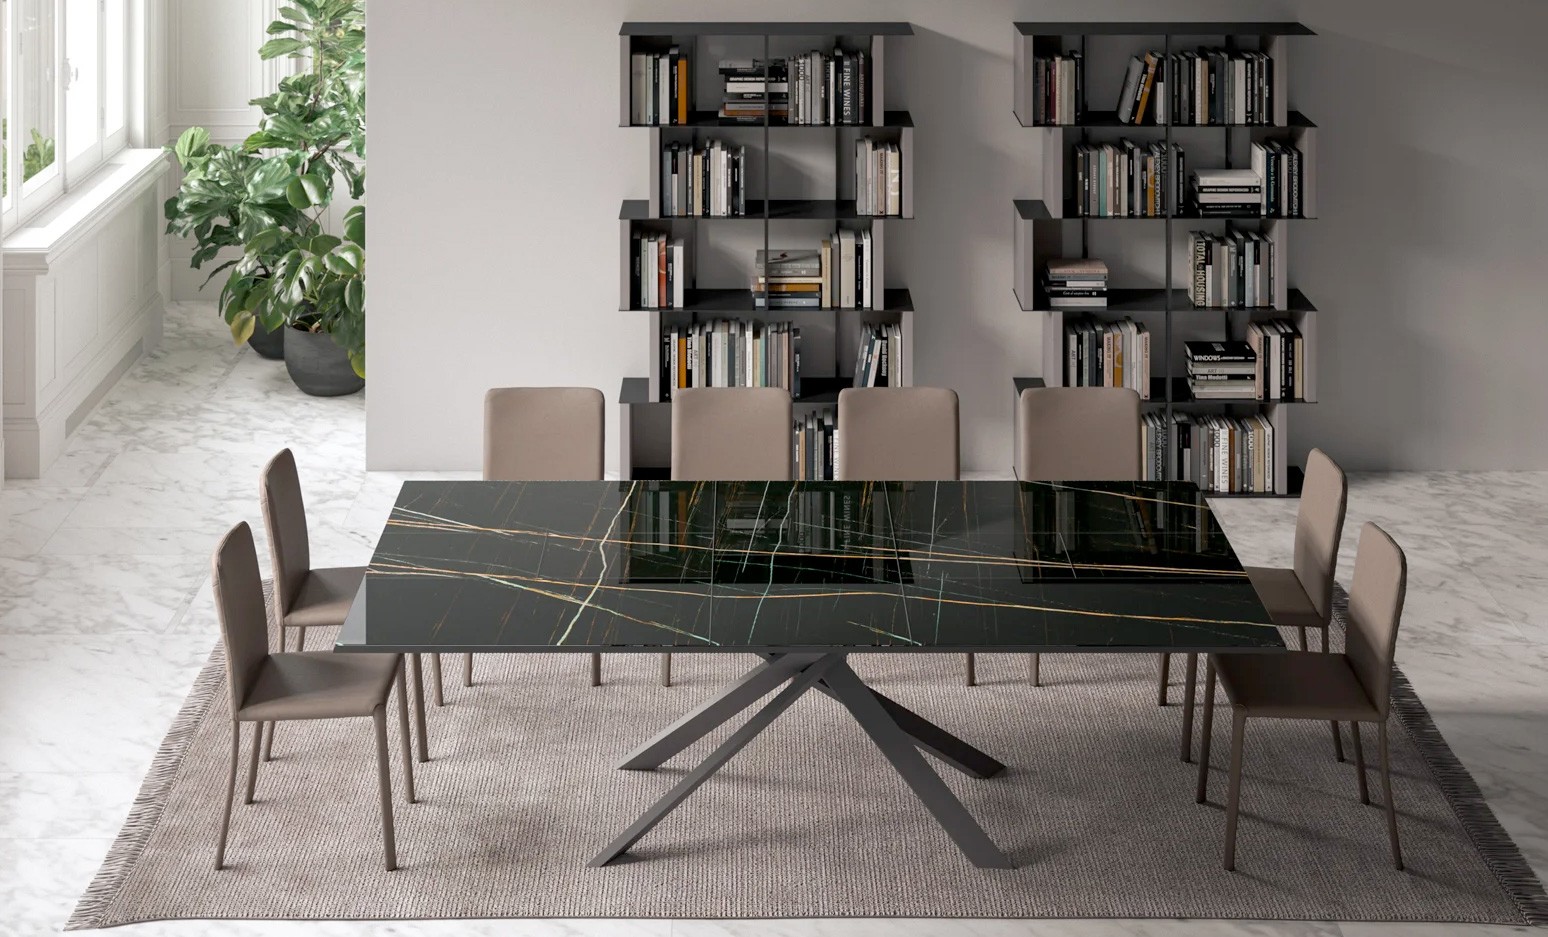 Extend and expand your dining experience with Clever Tables